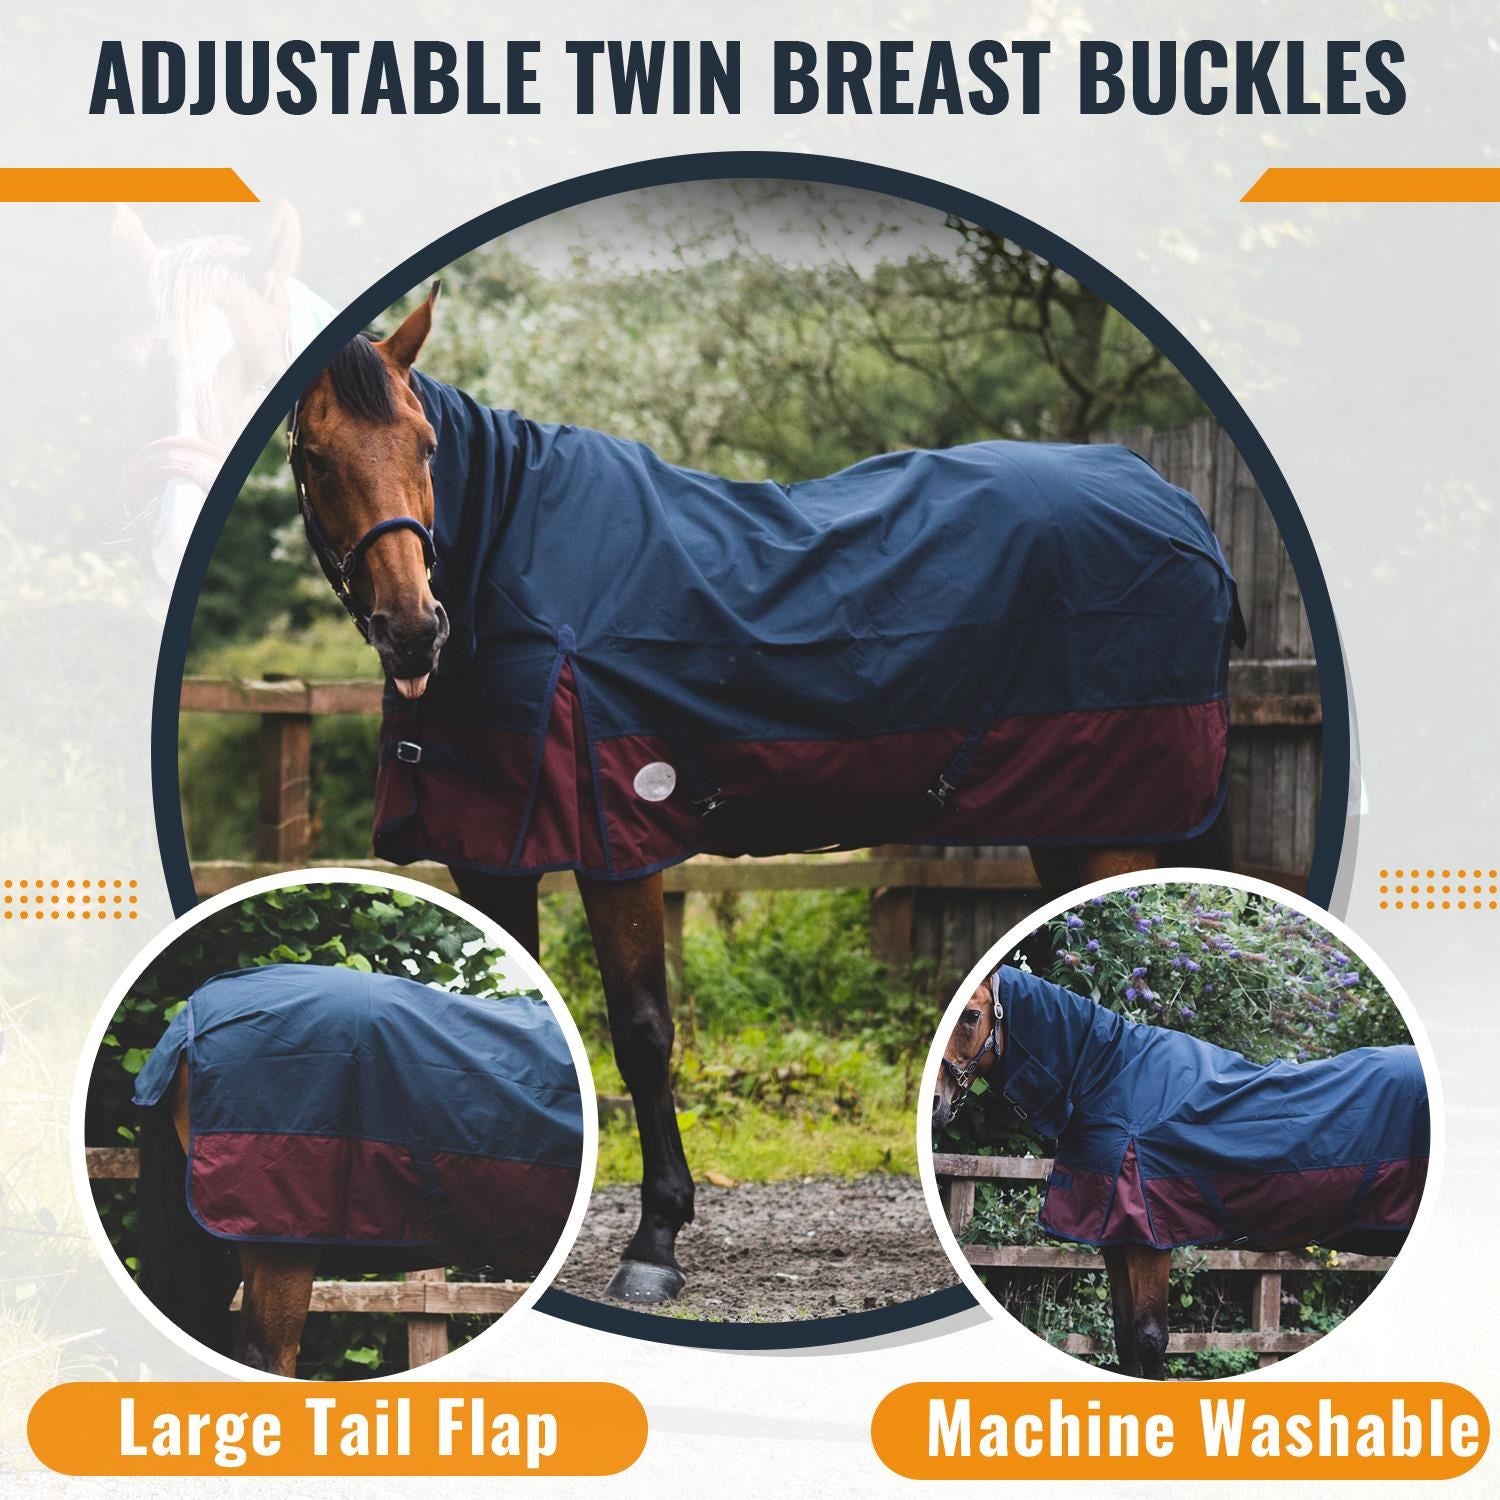 1200D Outdoor Winter Turnout Horse Rugs 50G Fill COMBO Neck Navy/Burguny 5'3-6'9 - Tack24